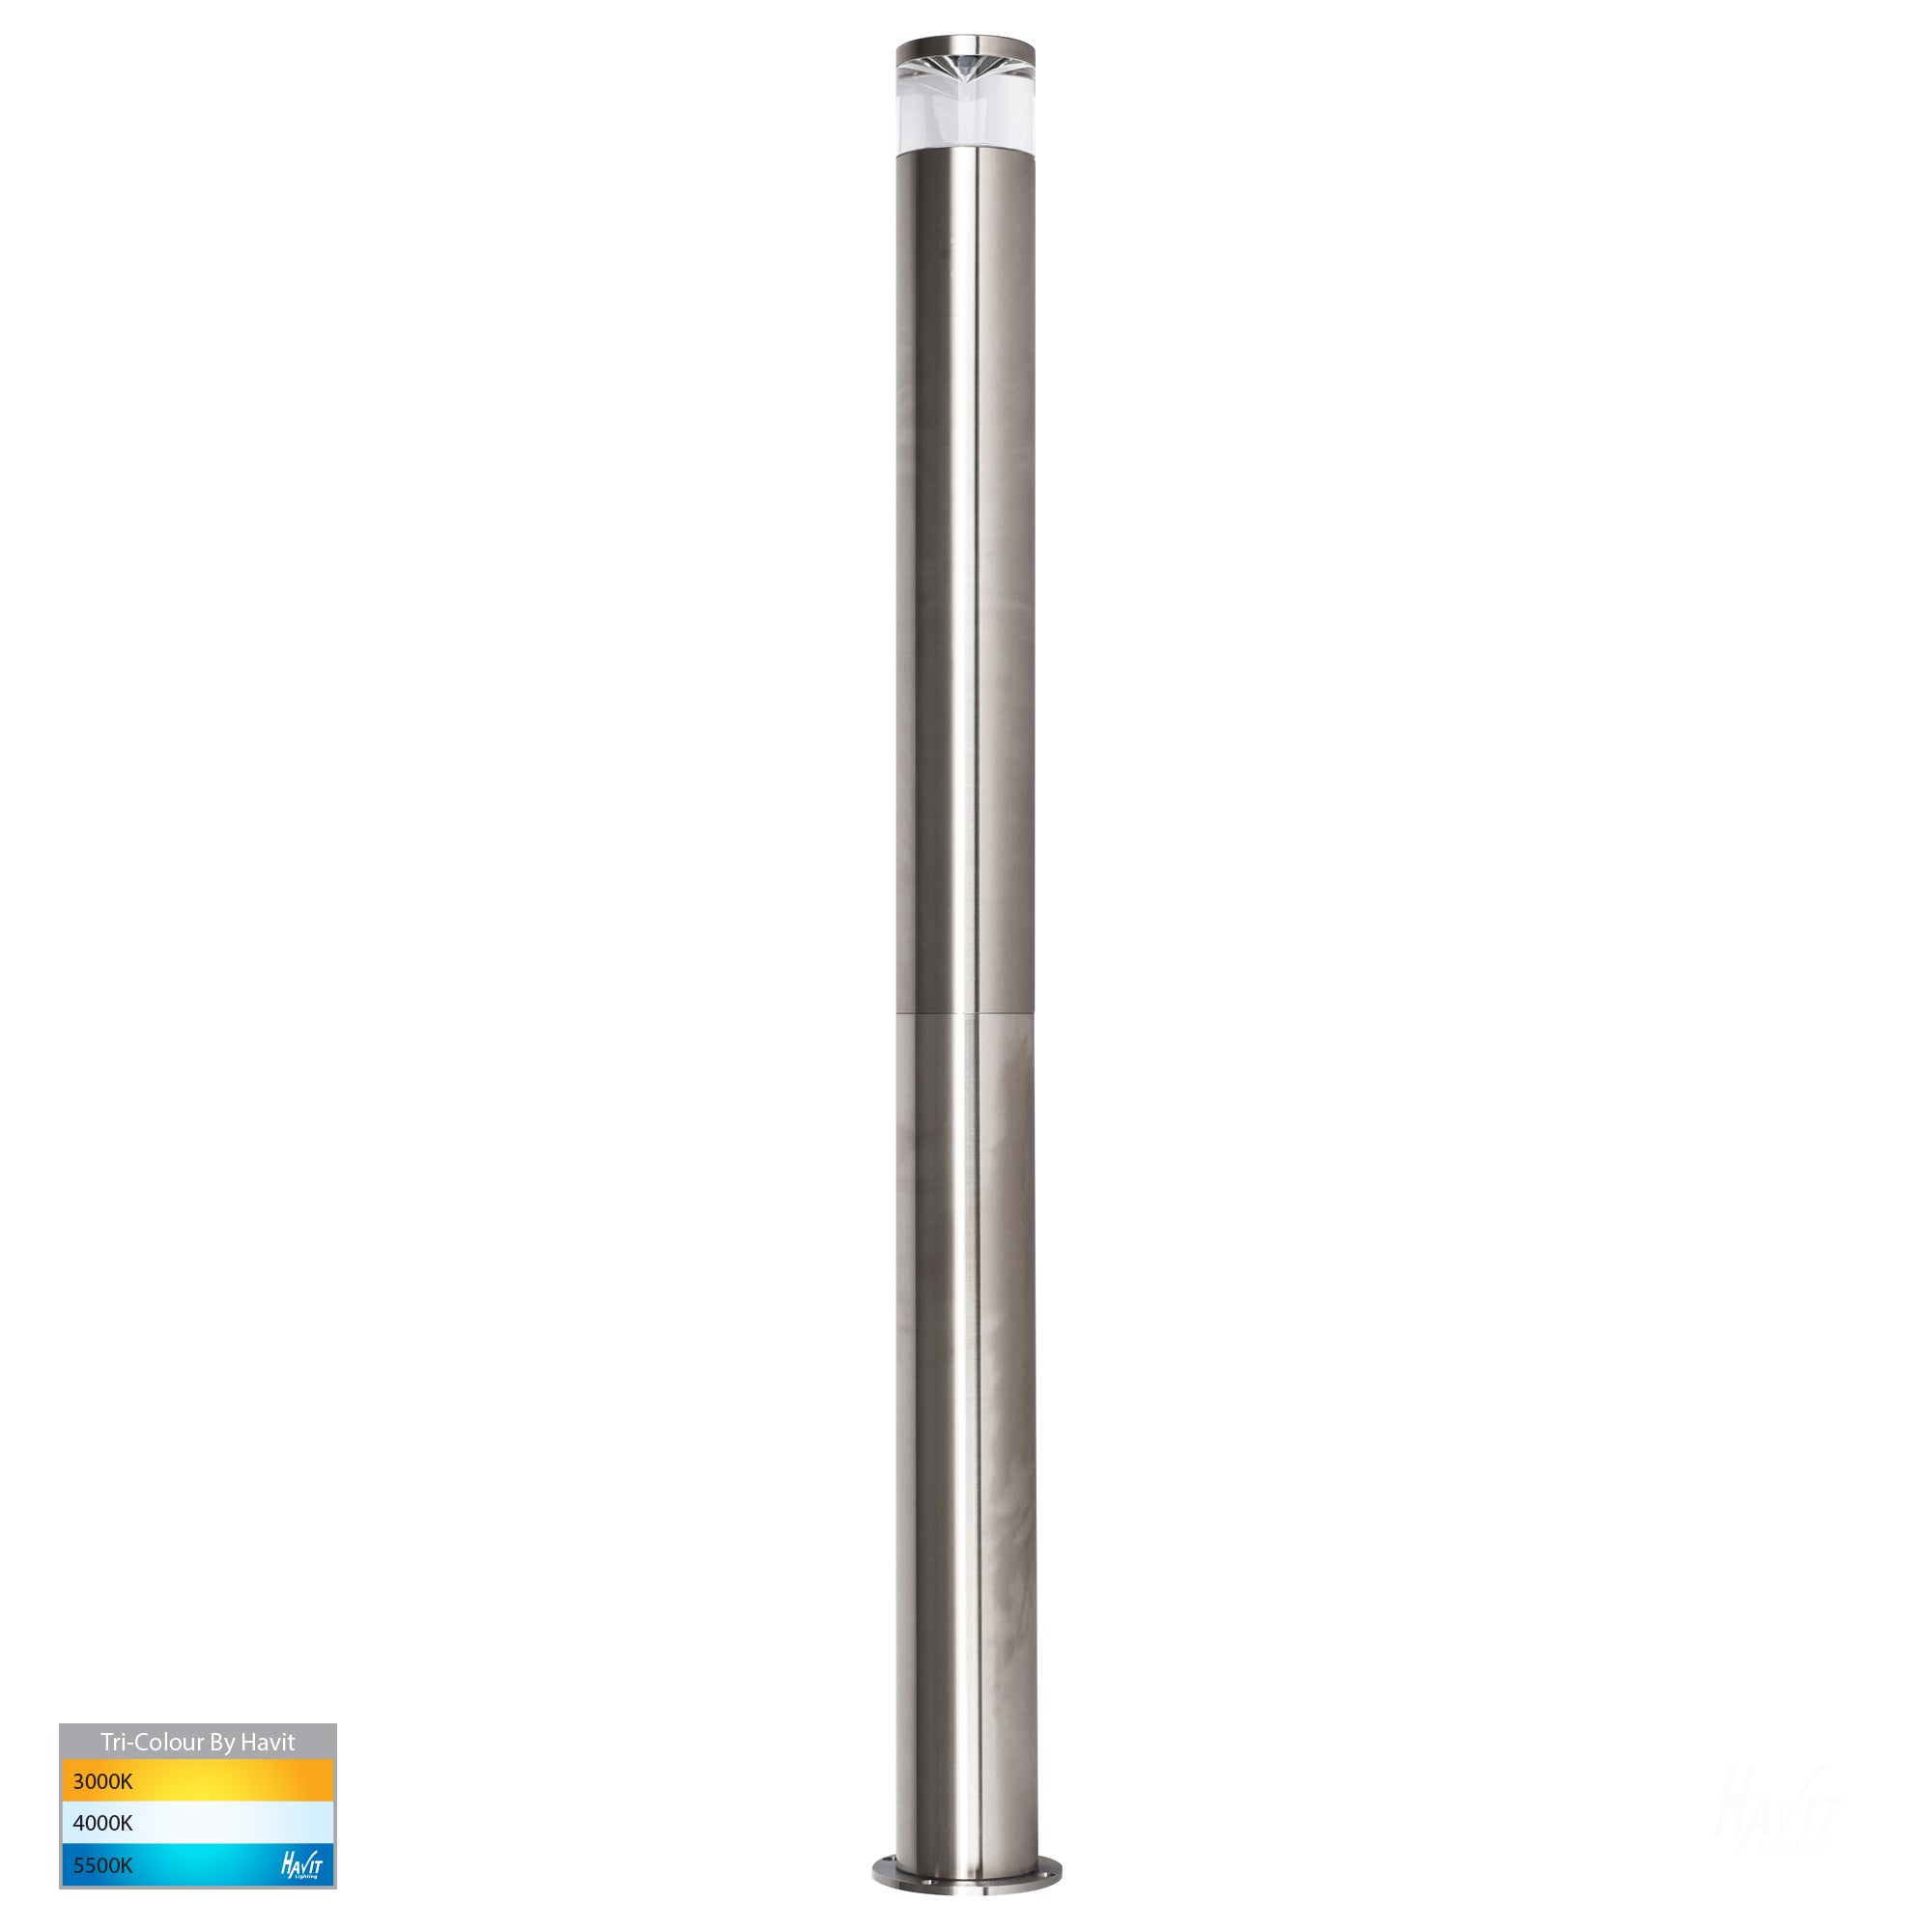 HV1603-SS316 - 316 Stainless Steel Bollard Extension to suit HV1601T-SS316 & HV1602T-SS316